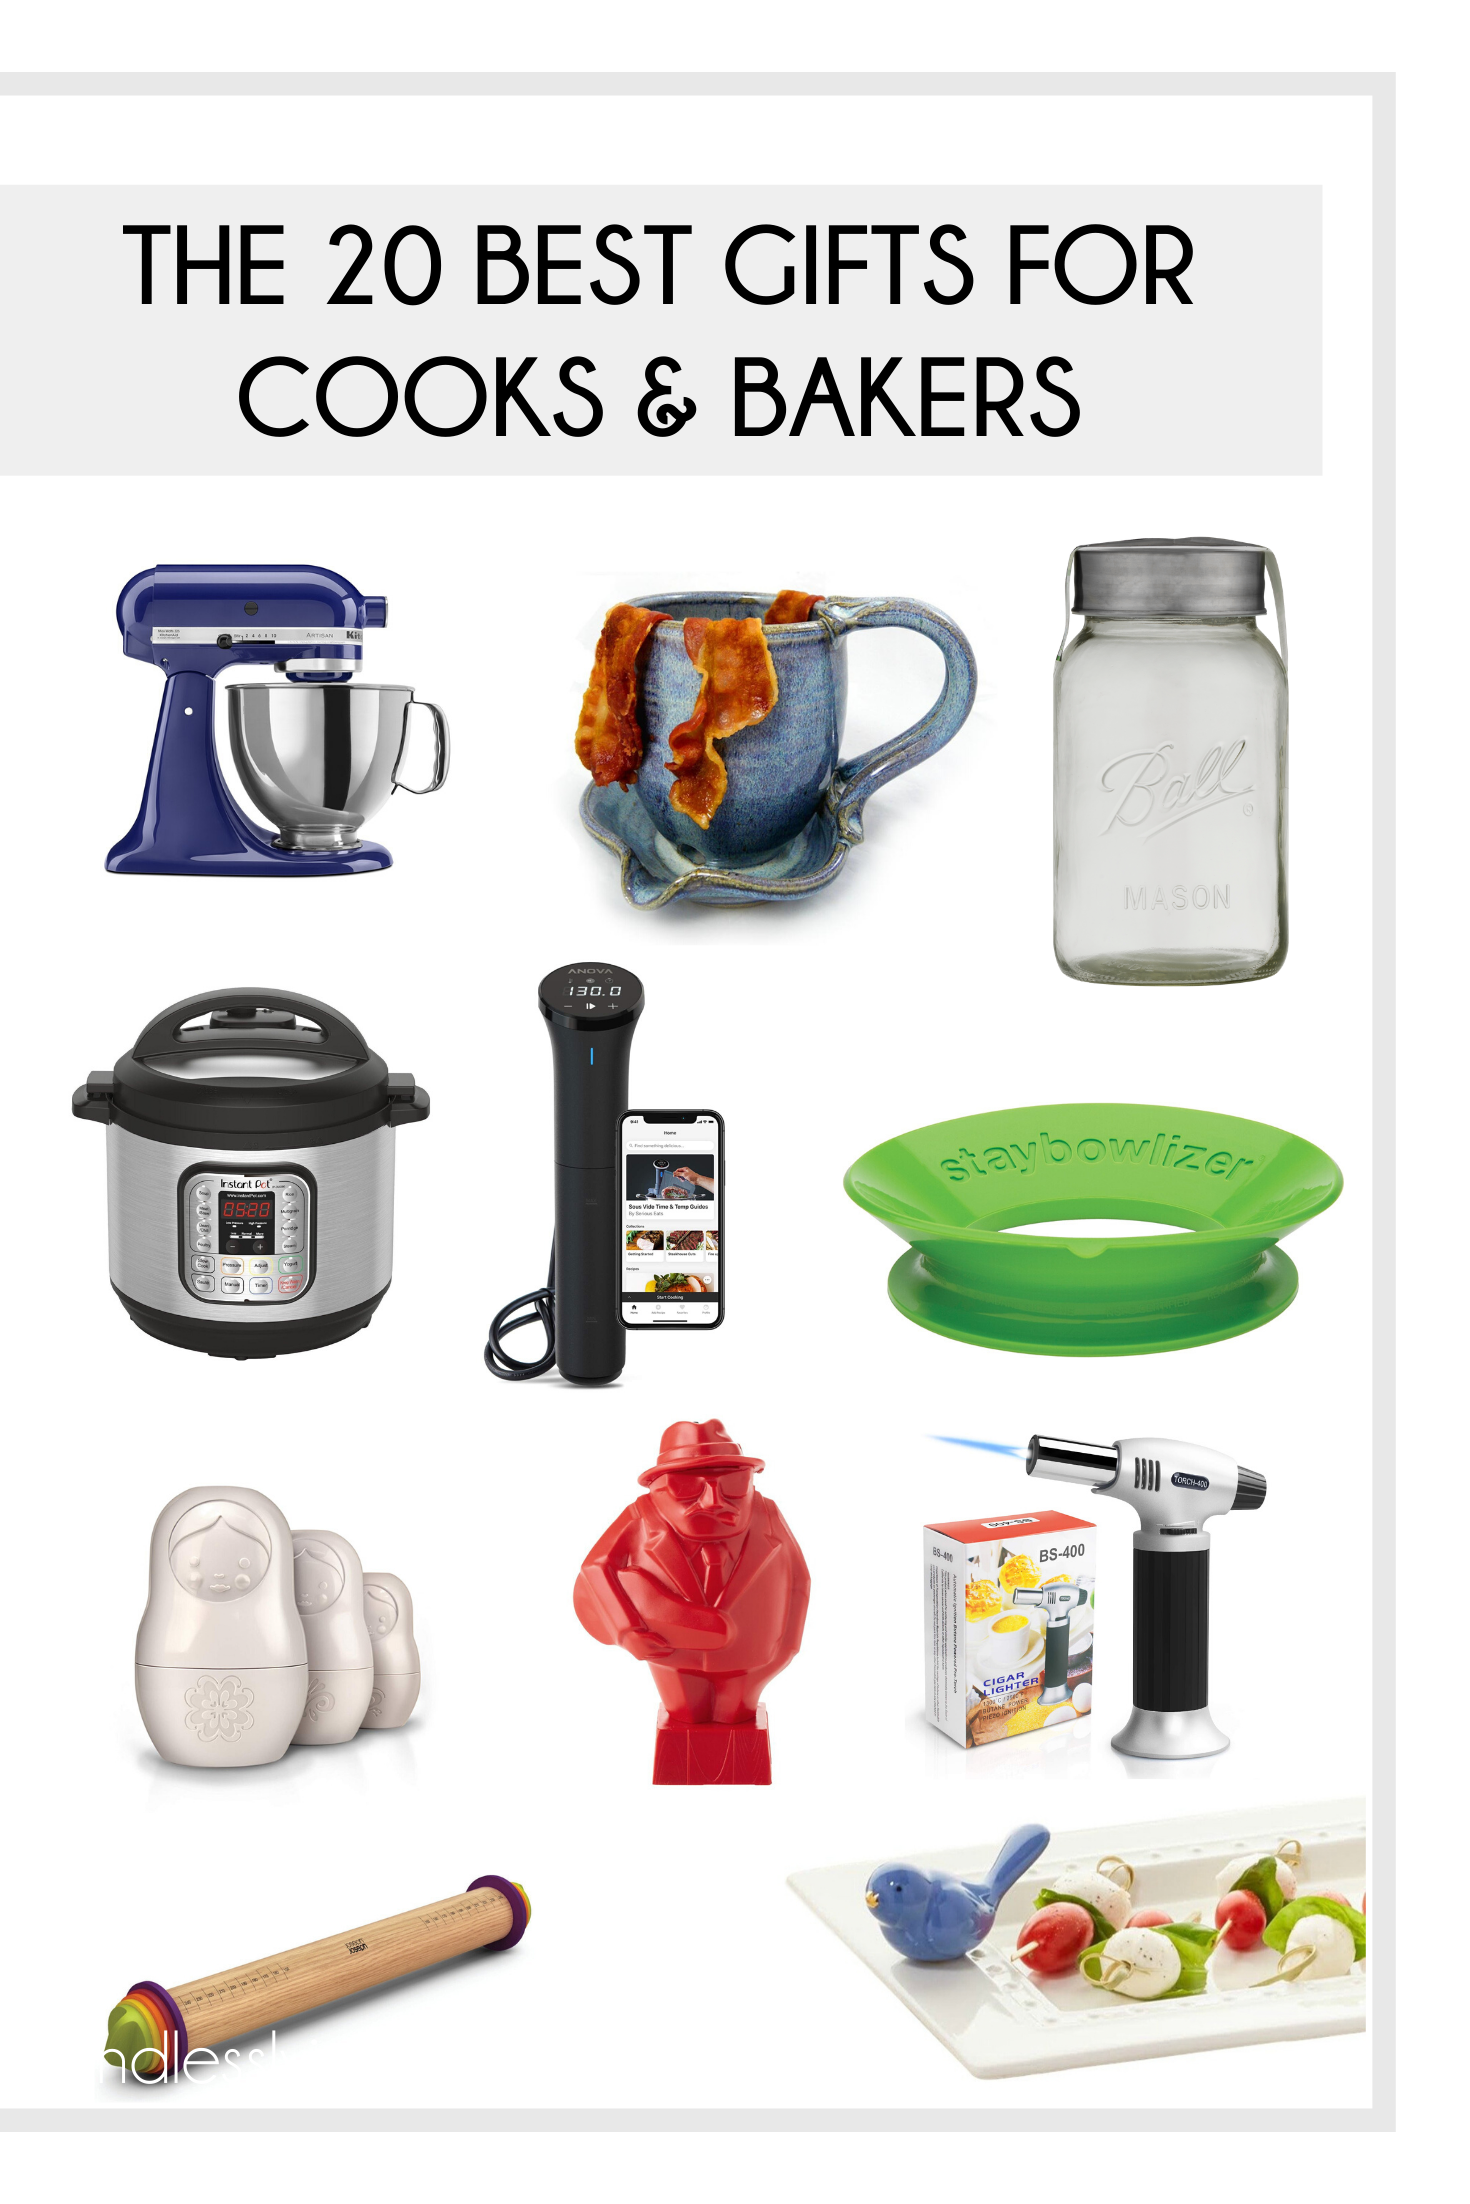 Collage of gifts for cooks & bakers